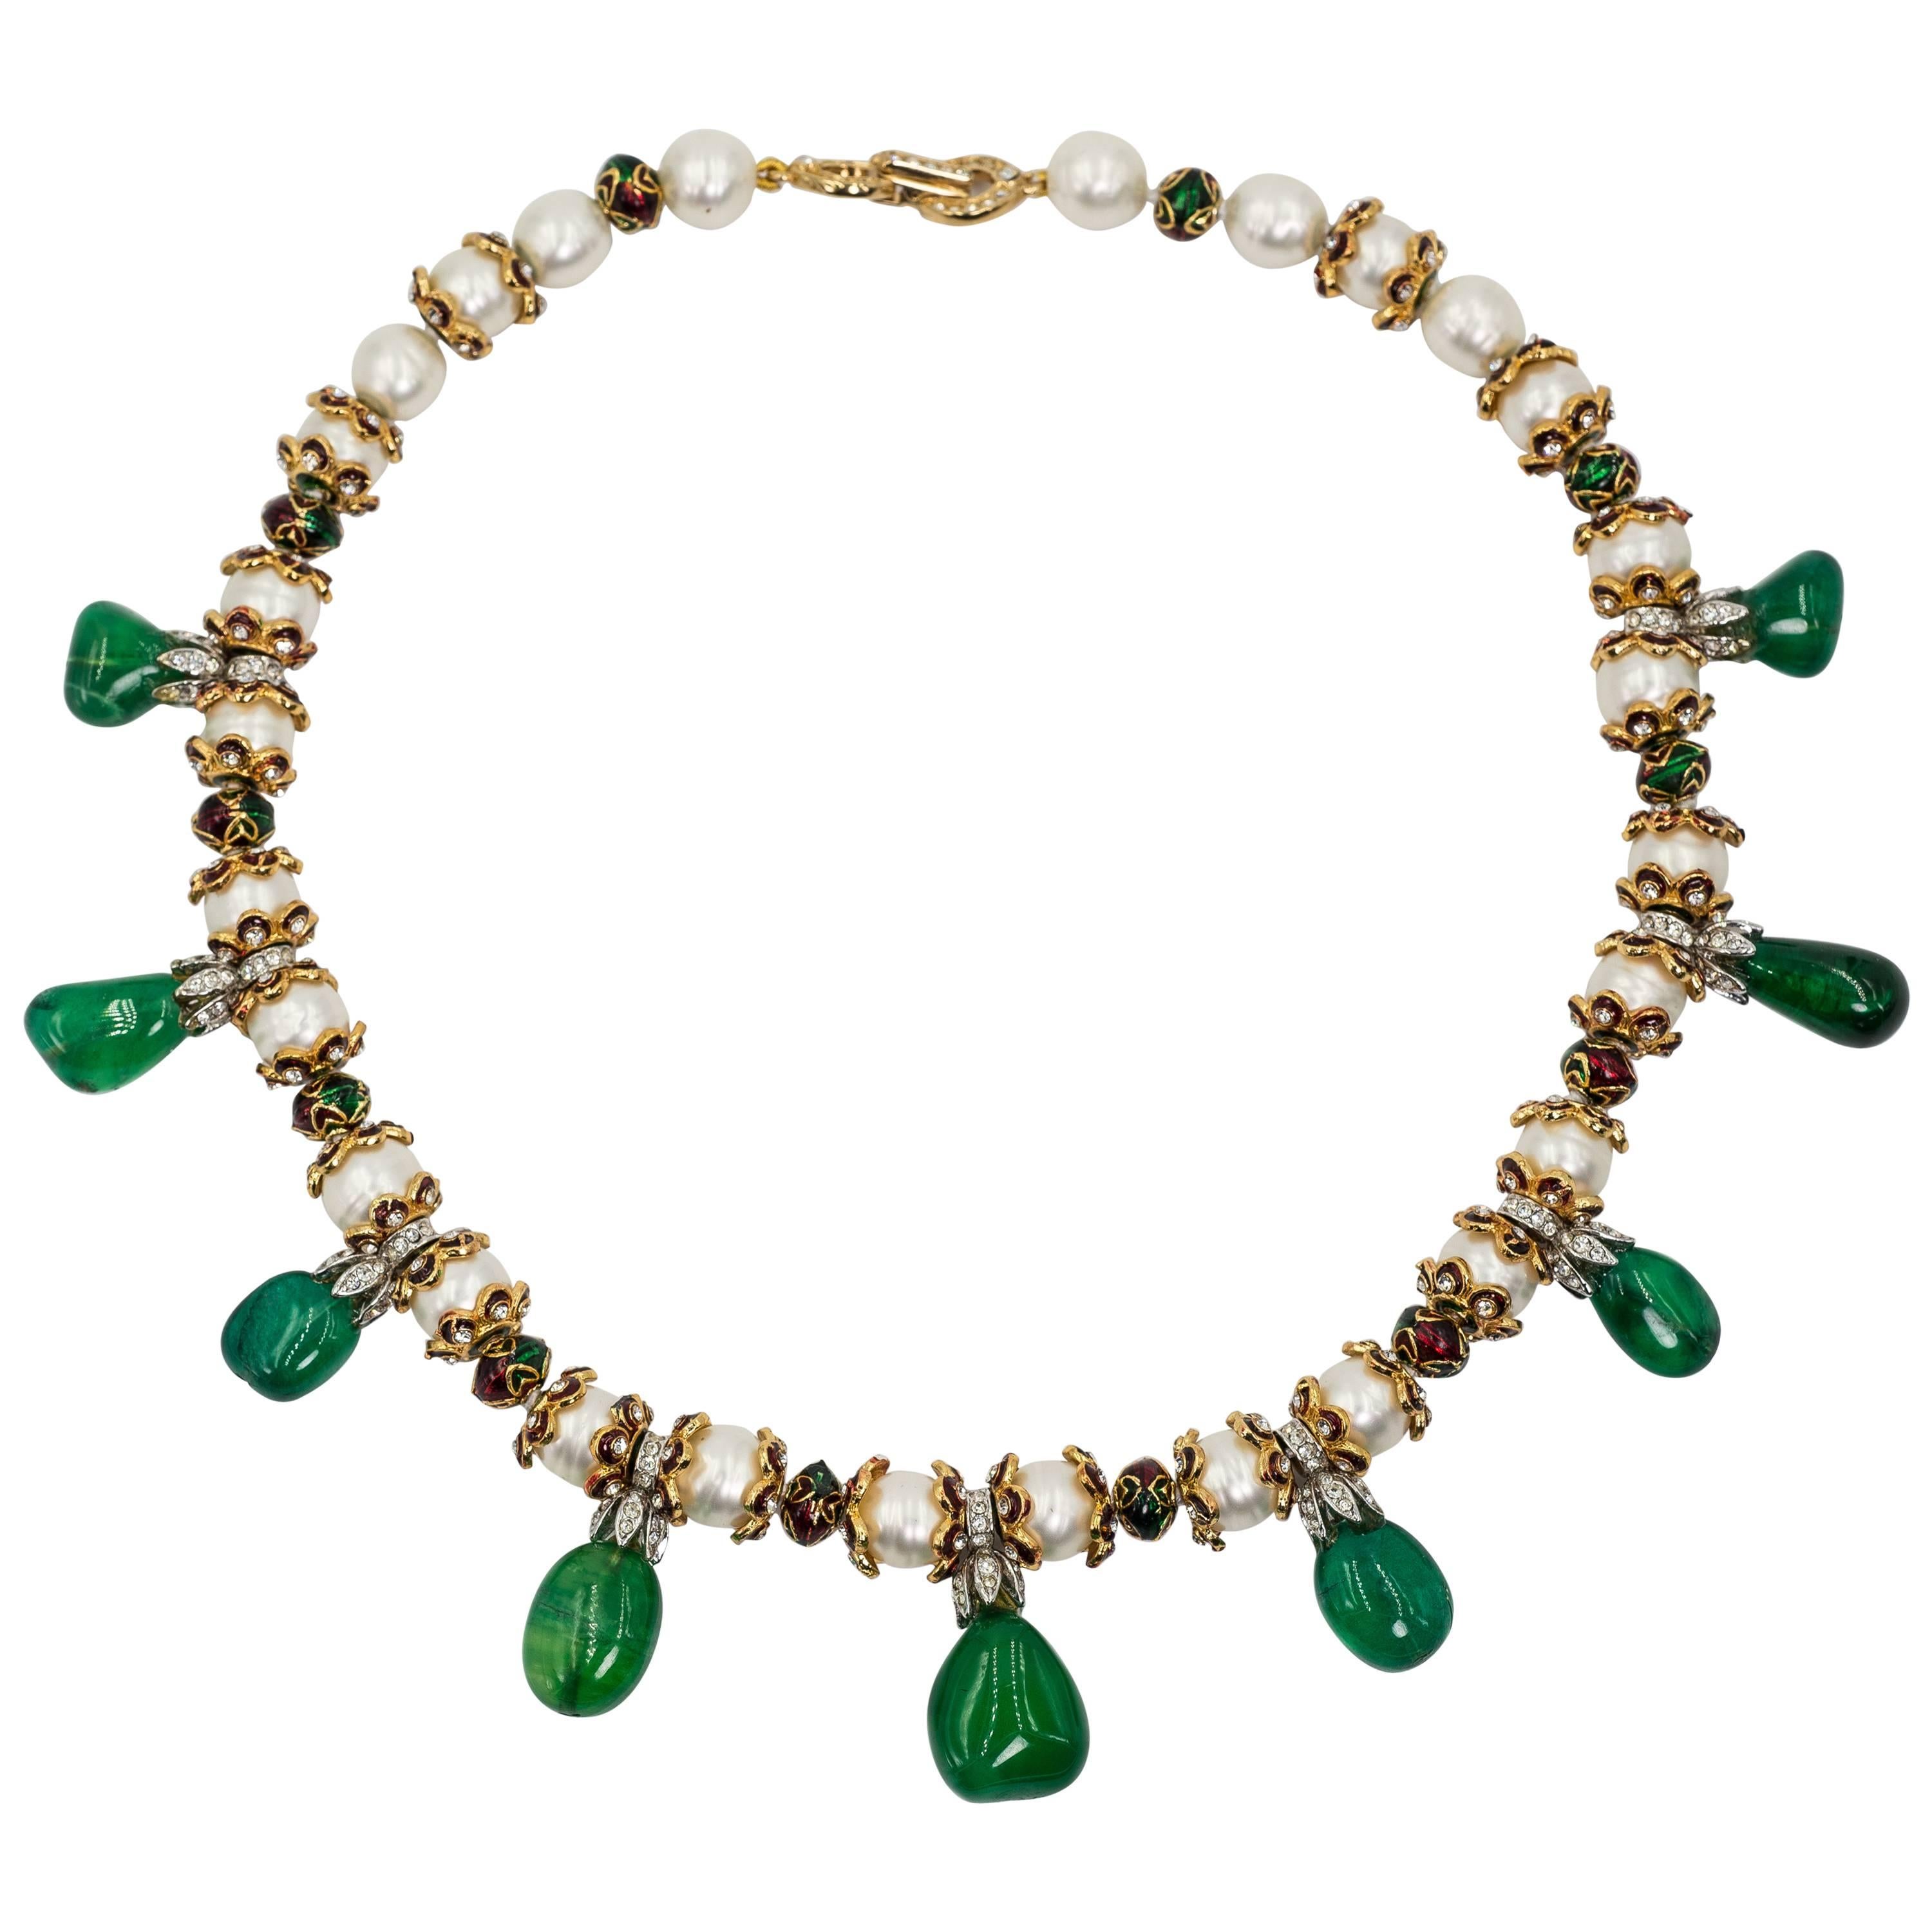 Royal Indian Style Faux Emerald Pearl Jaipur Enamel Collier